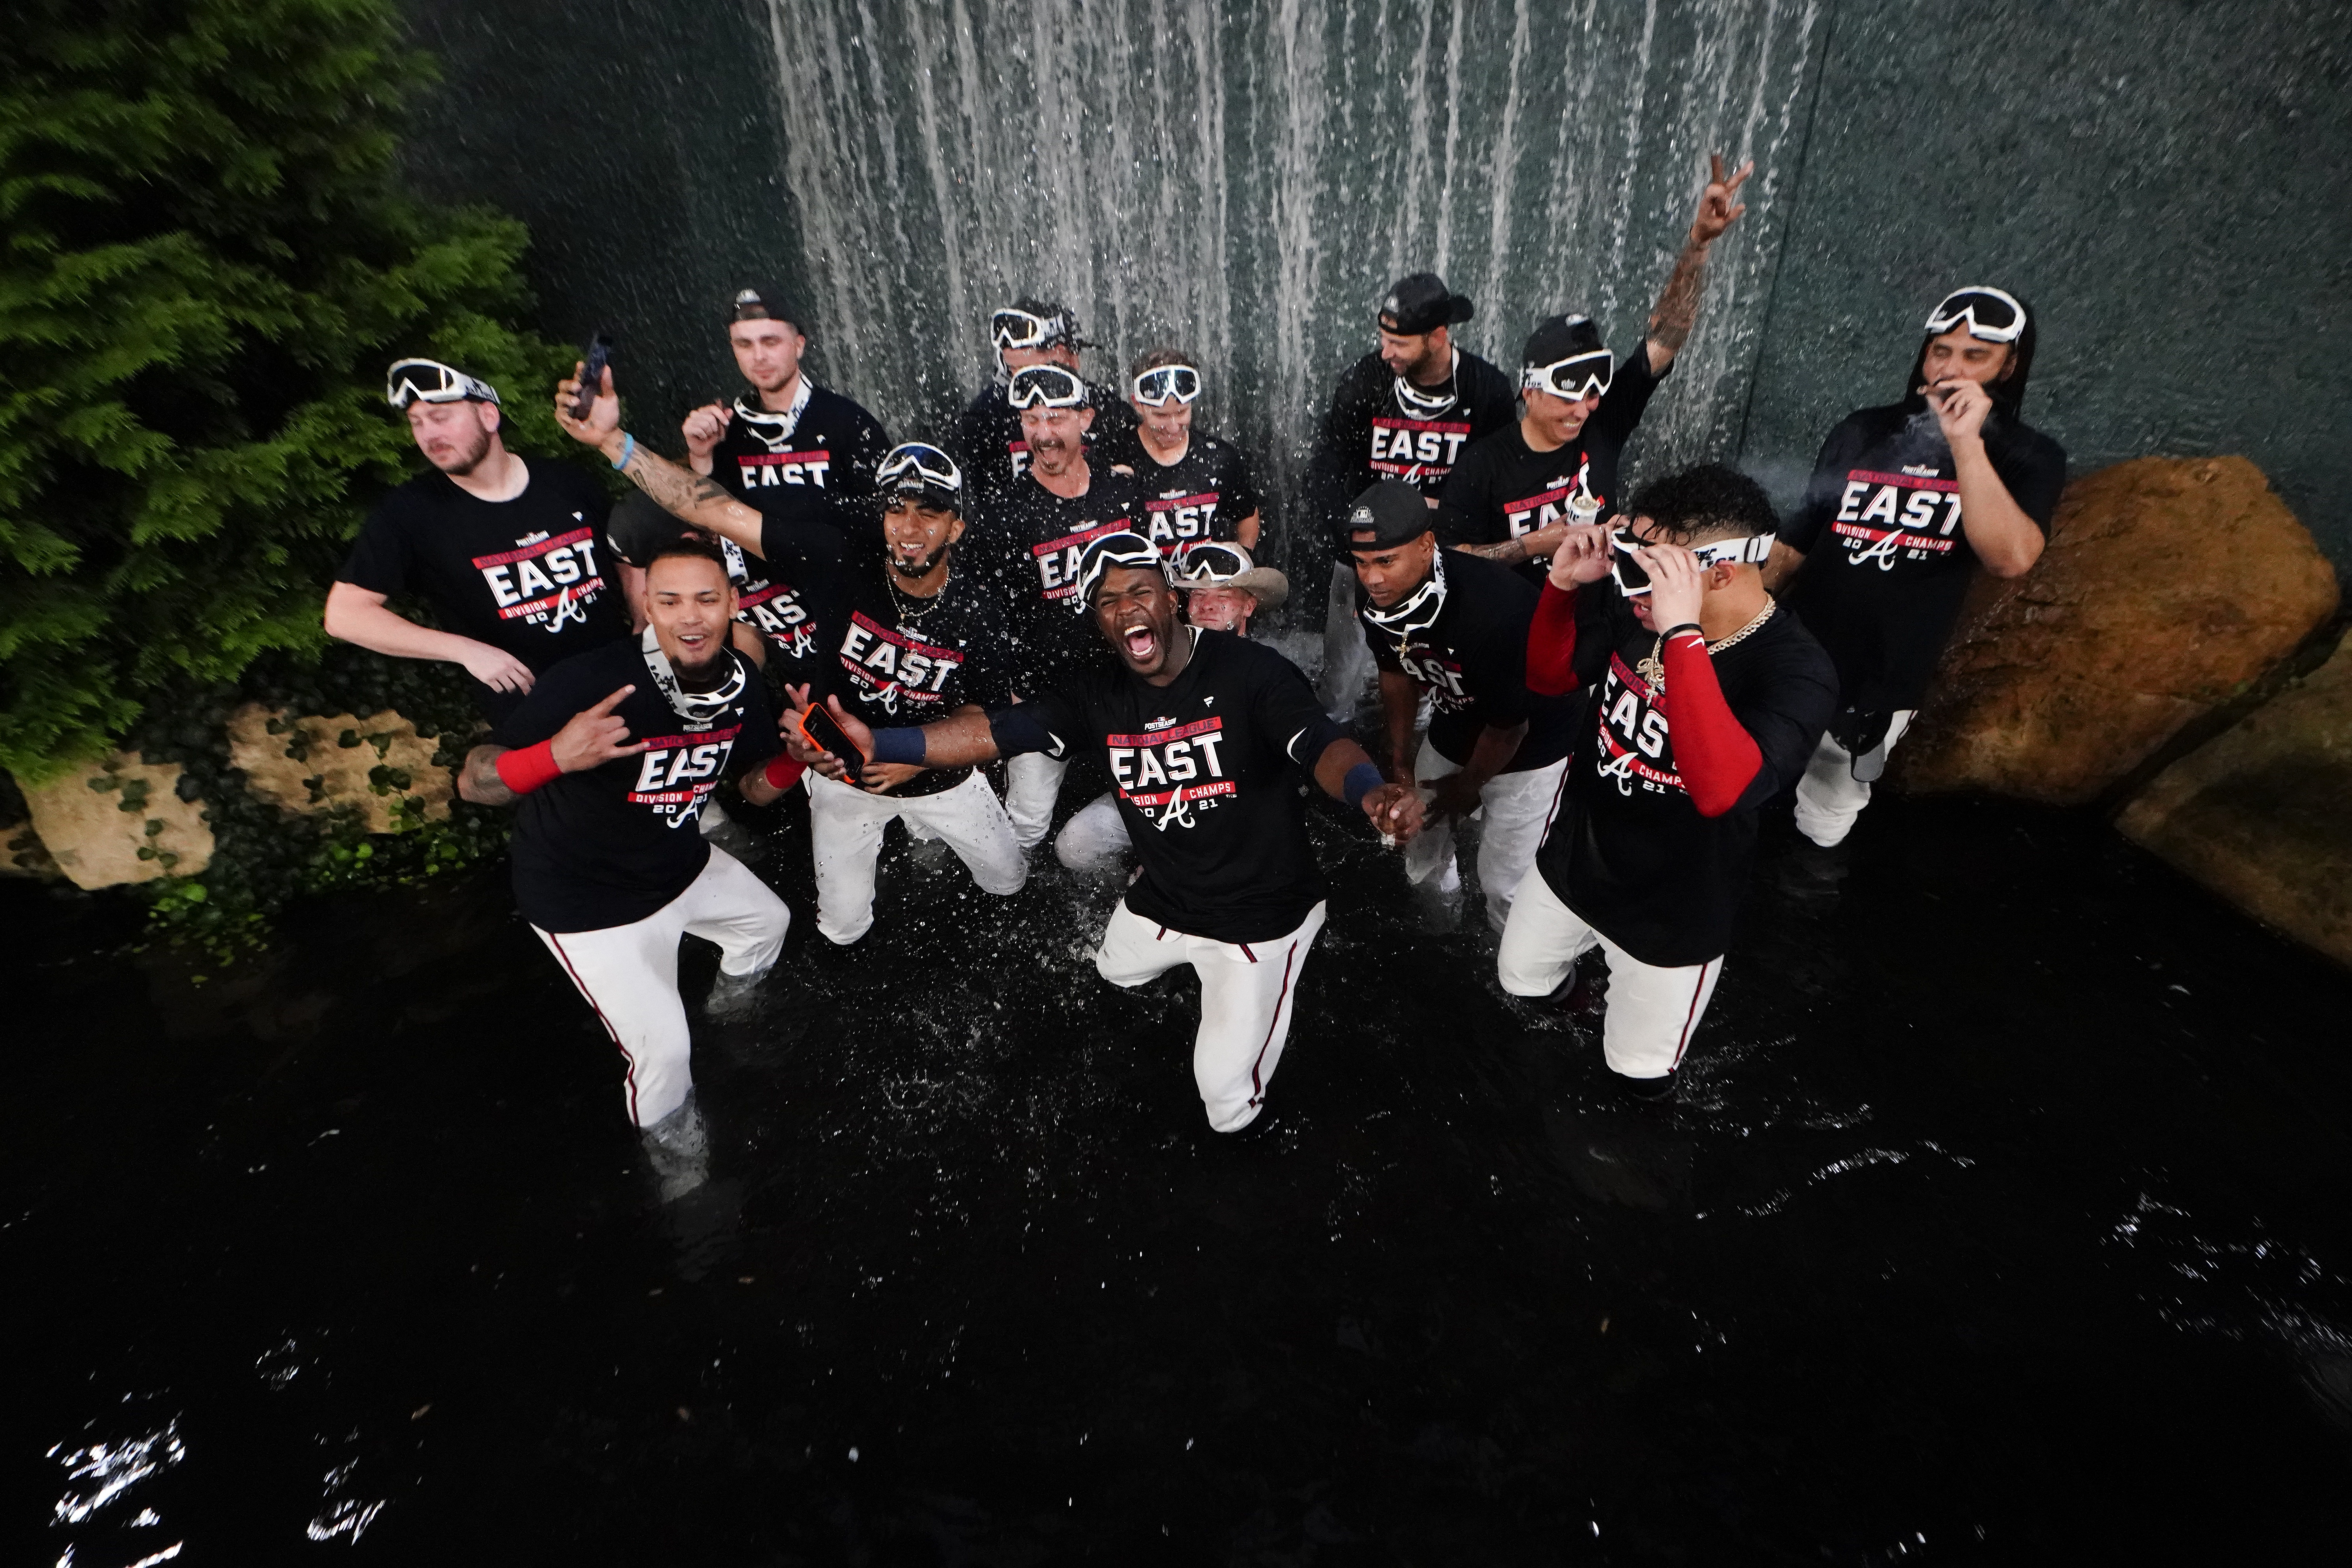 Atlanta Braves clinch 6th straight NL East title, beat Phillies 4